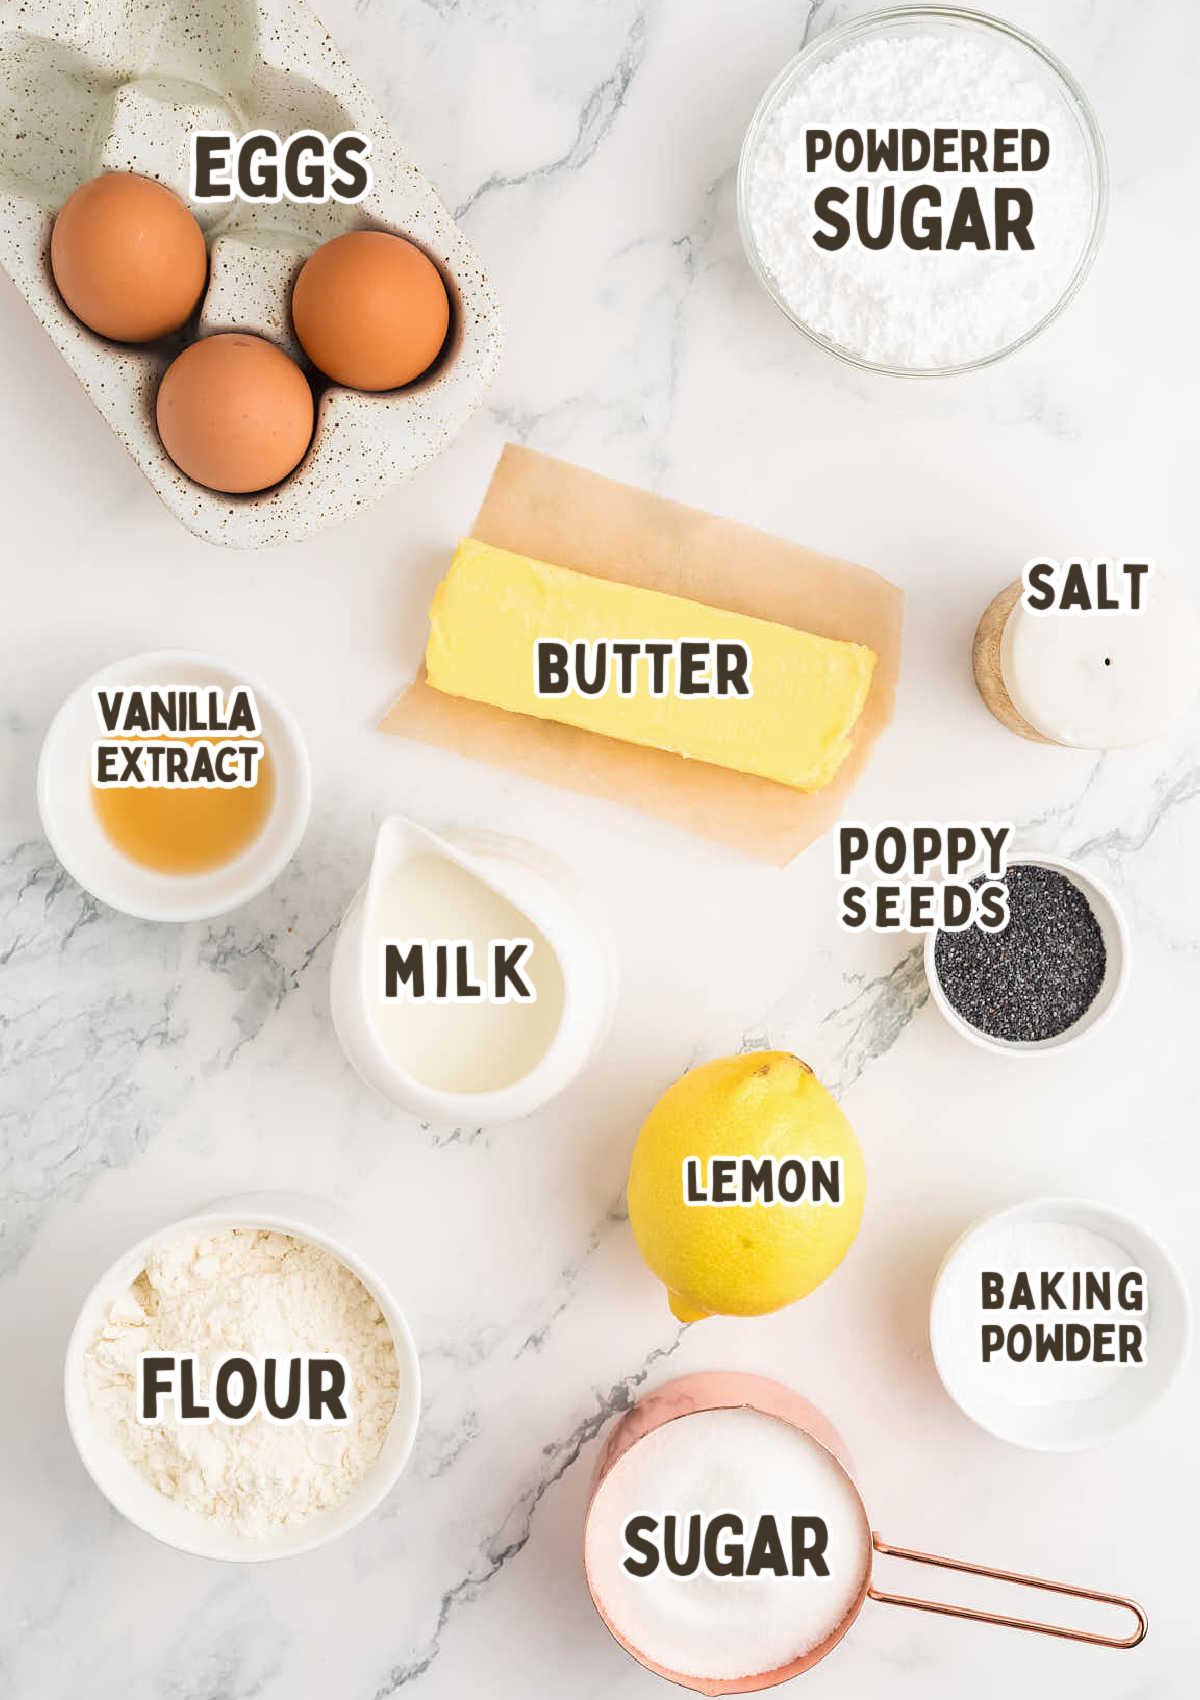 A list of ingredients for a Lemon Poppy Seed Loaf.